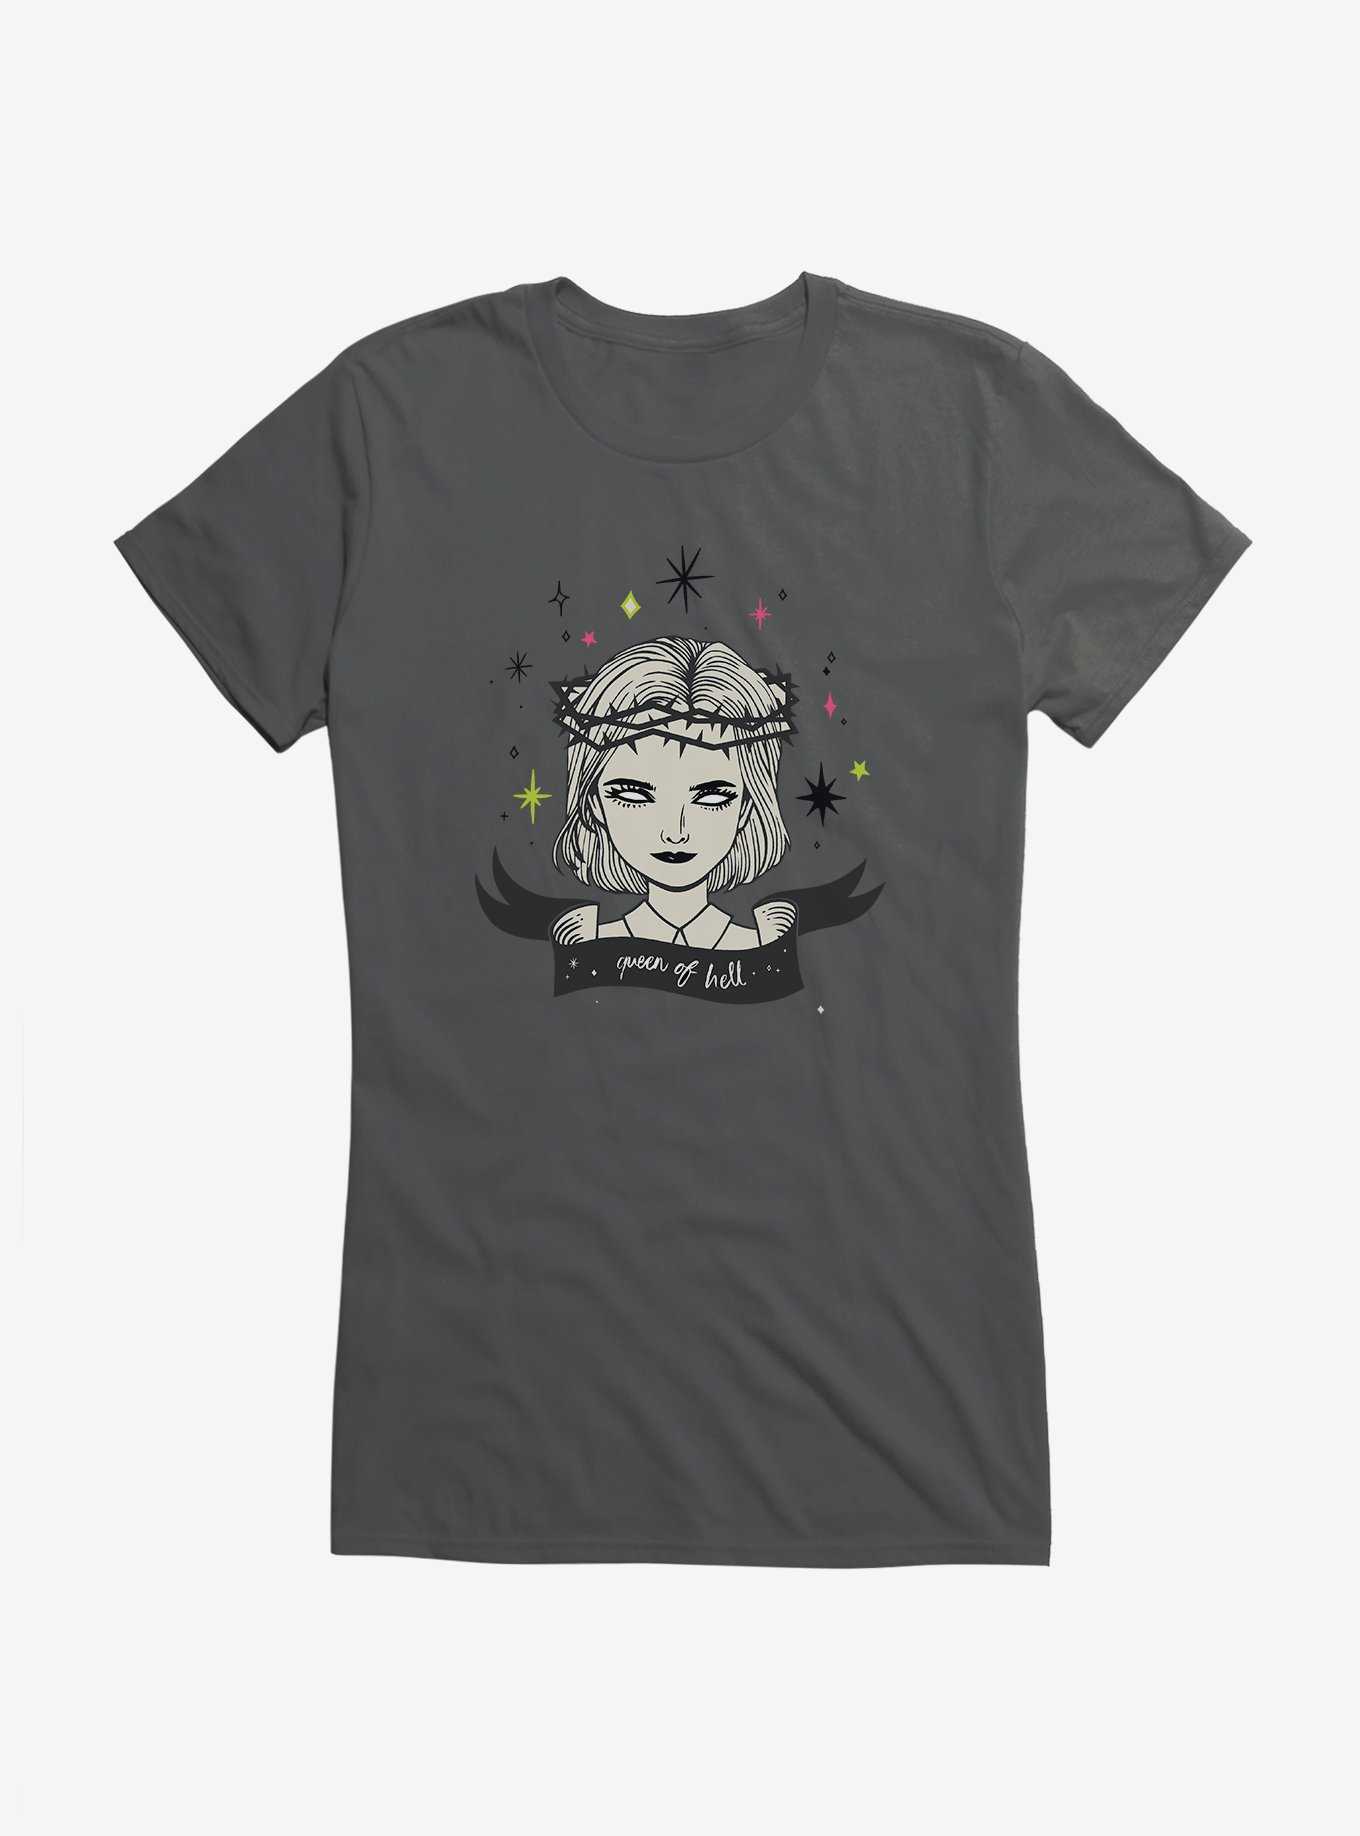 Chilling Adventures Of Sabrina Queen Of Hell Girls T-Shirt, , hi-res